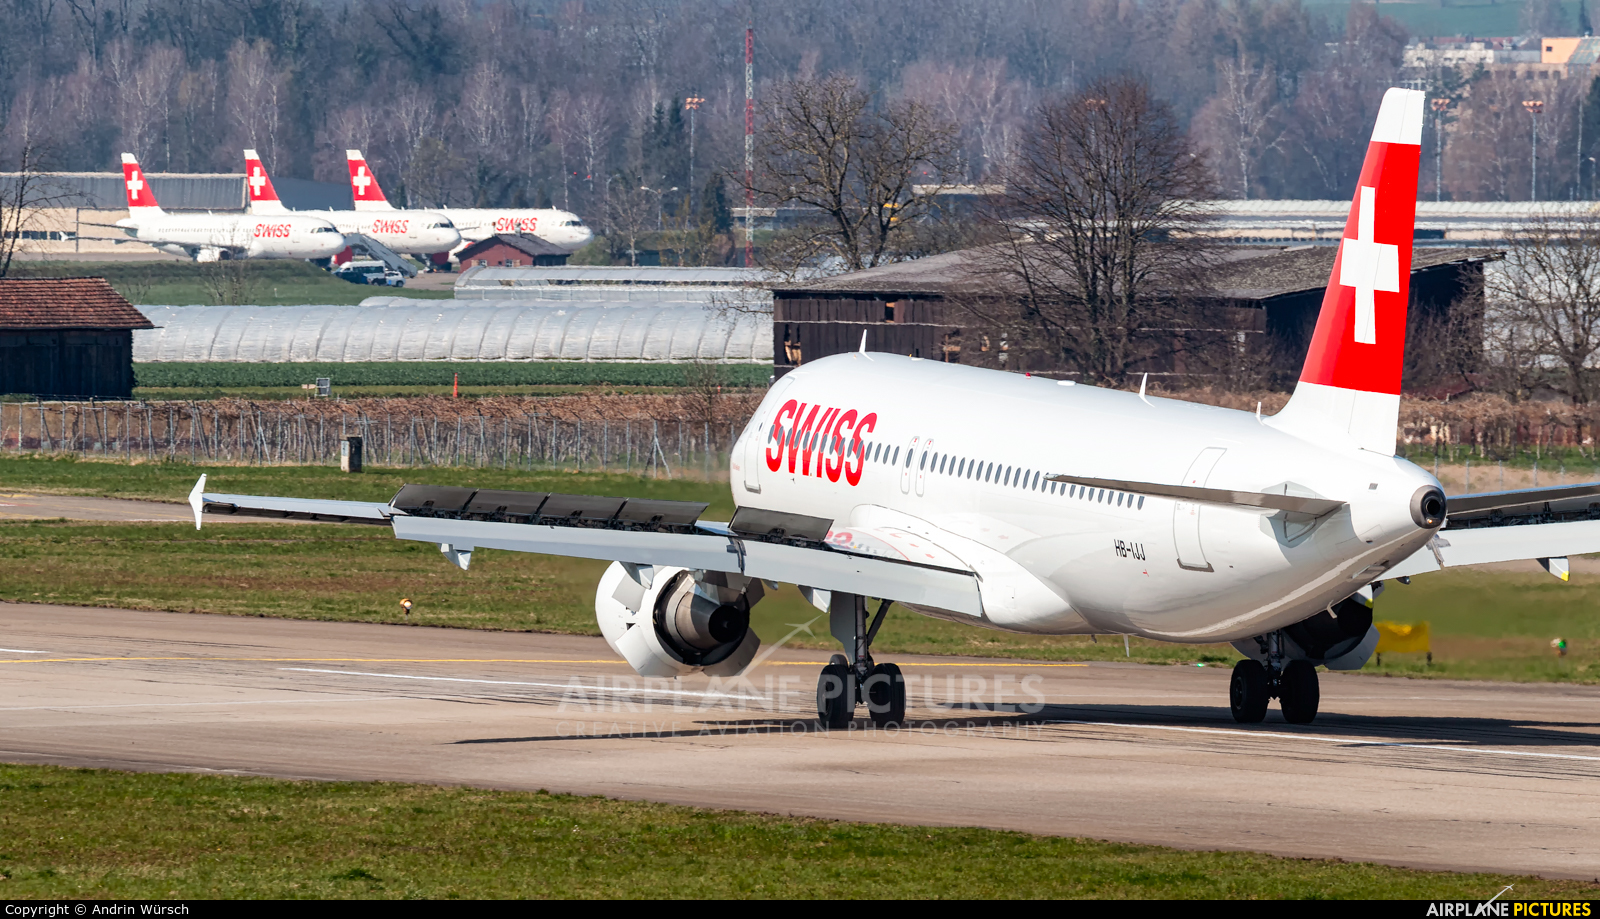 Hb Ijj Swiss Airbus A320 At Dubendorf Photo Id 1289419 Airplane Pictures Net